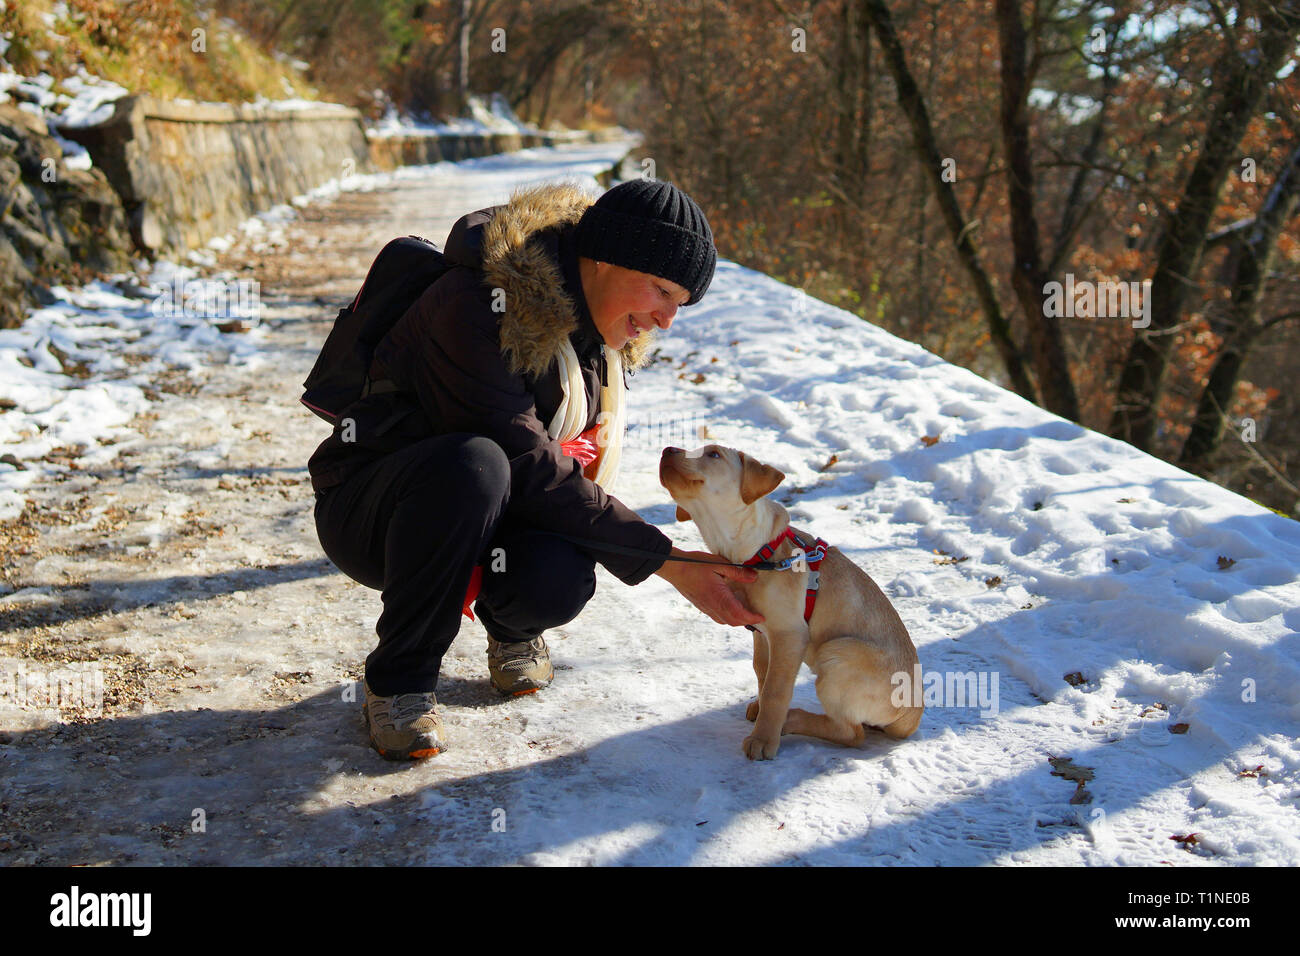 43/5000 A woman during a winter walk with her dog. Stock Photo